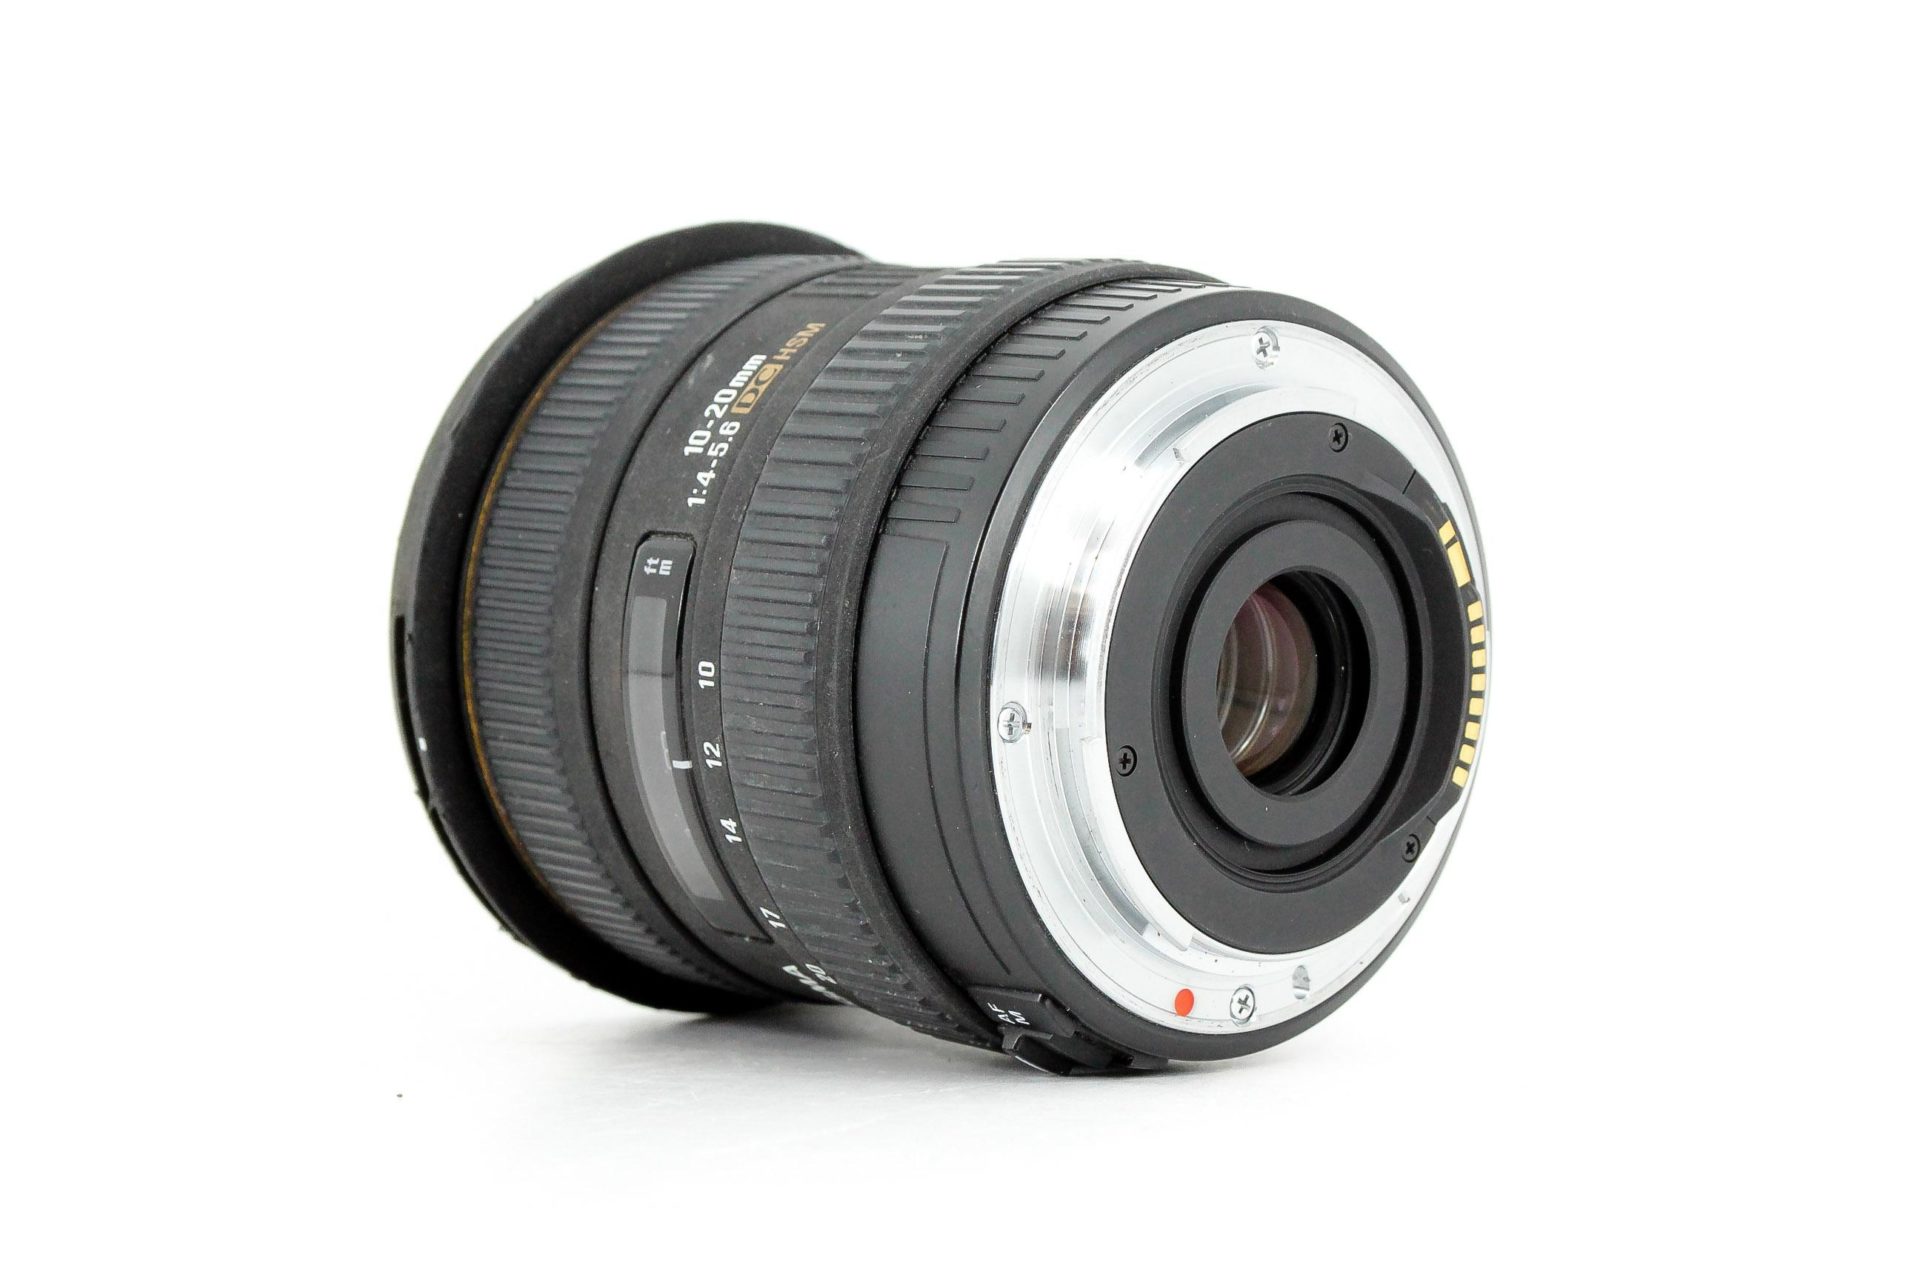 Sigma 10-20mm f/4-5.6 EX DC HSM Canon EF-S Fit Lens - Lenses and Cameras